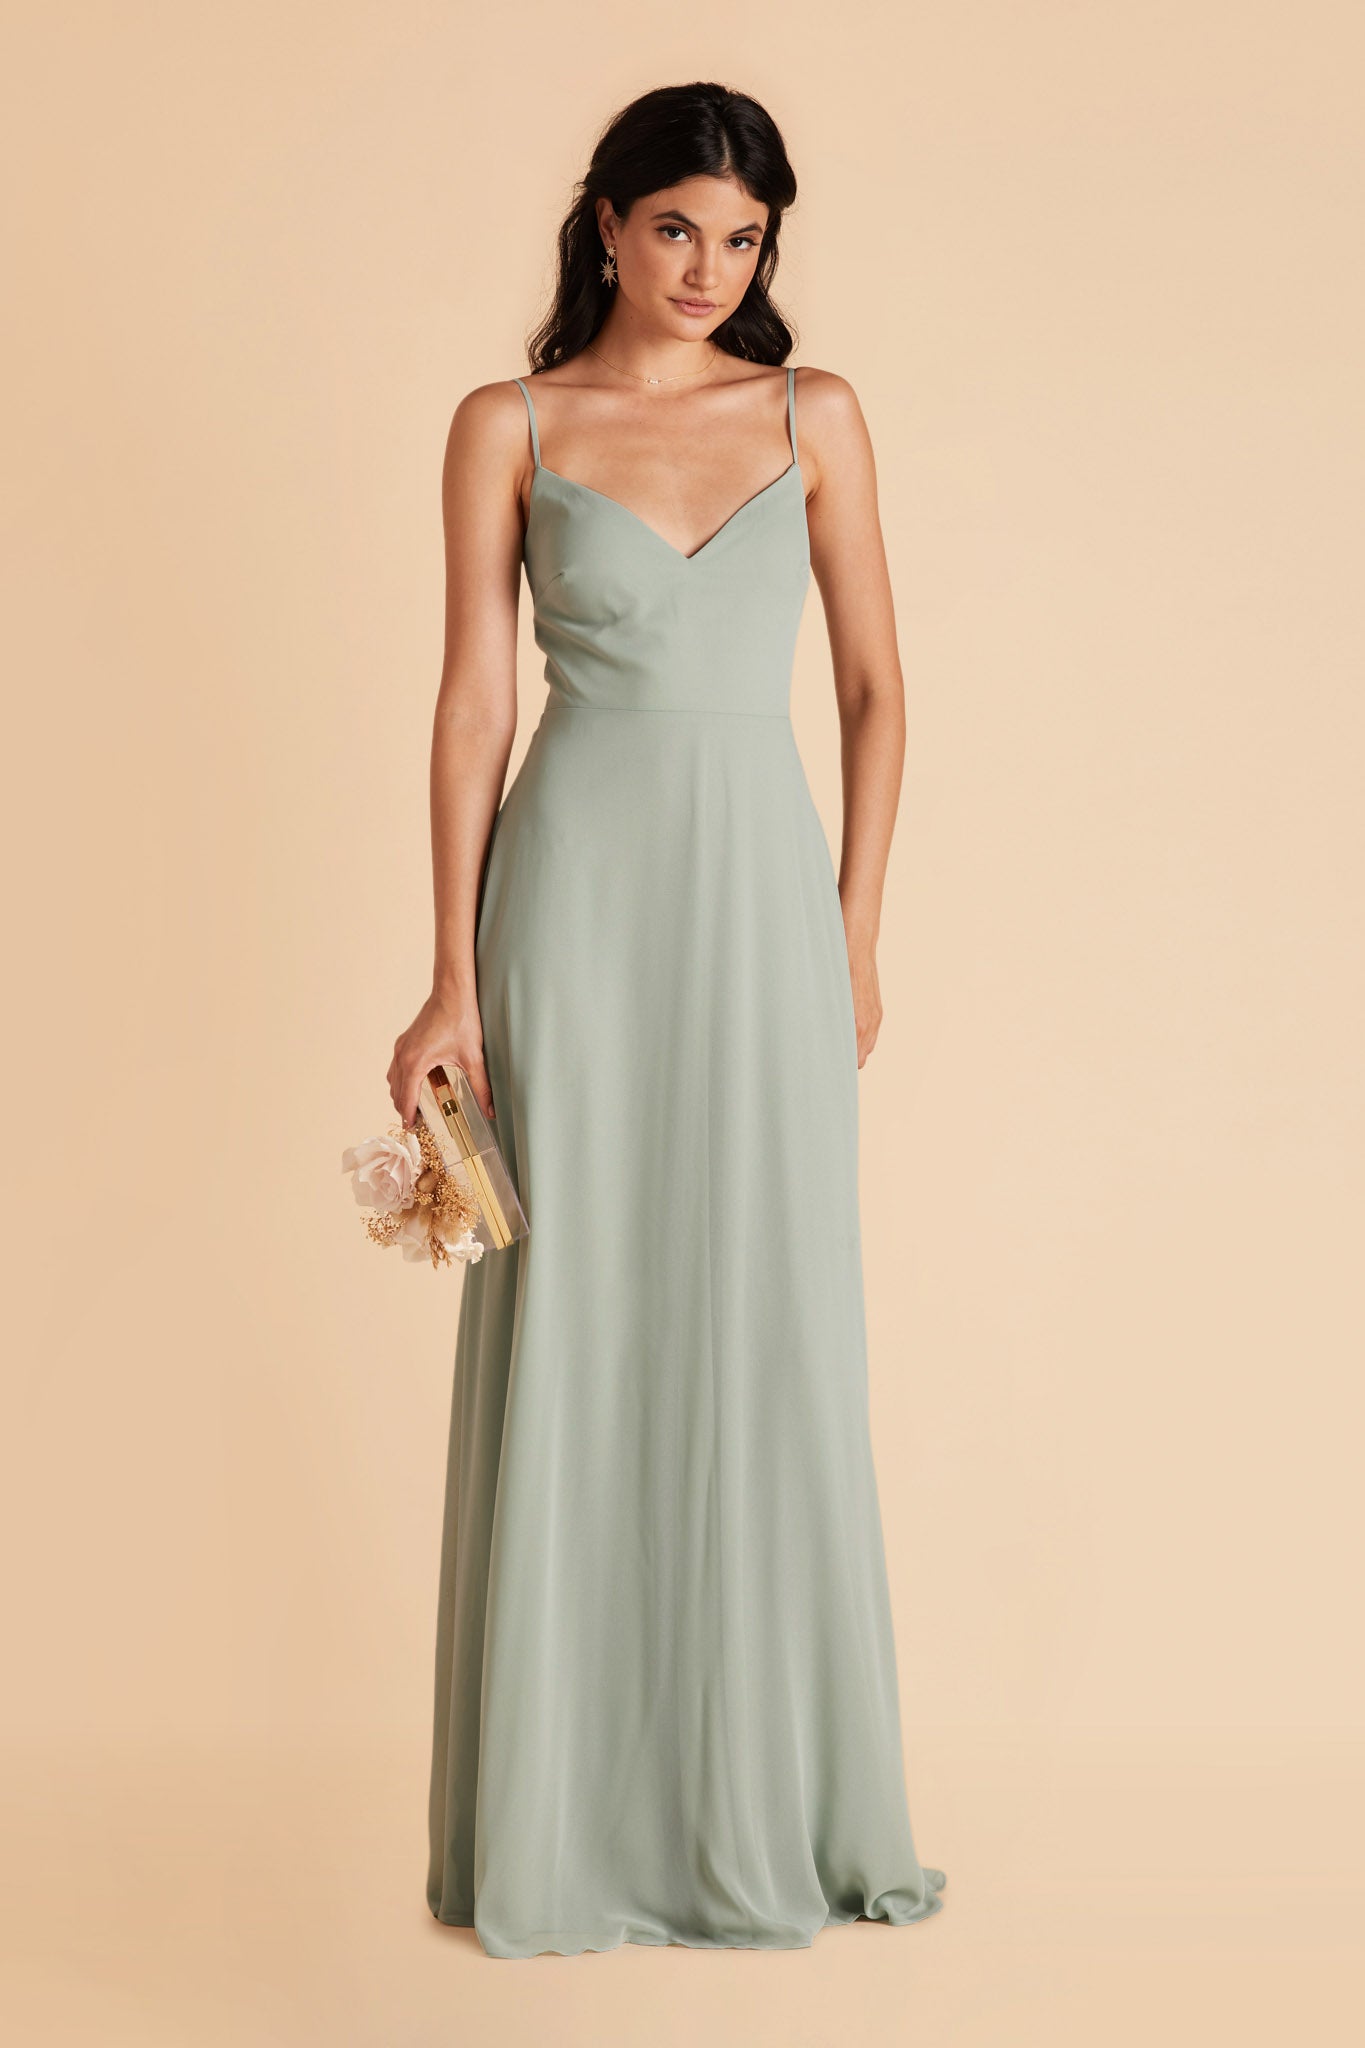 Front view of the floor-length Devin Convertible Bridesmaid Dress in sage chiffon with a V-neck front. The flowing skirt has no slit, as this is an optional feature.